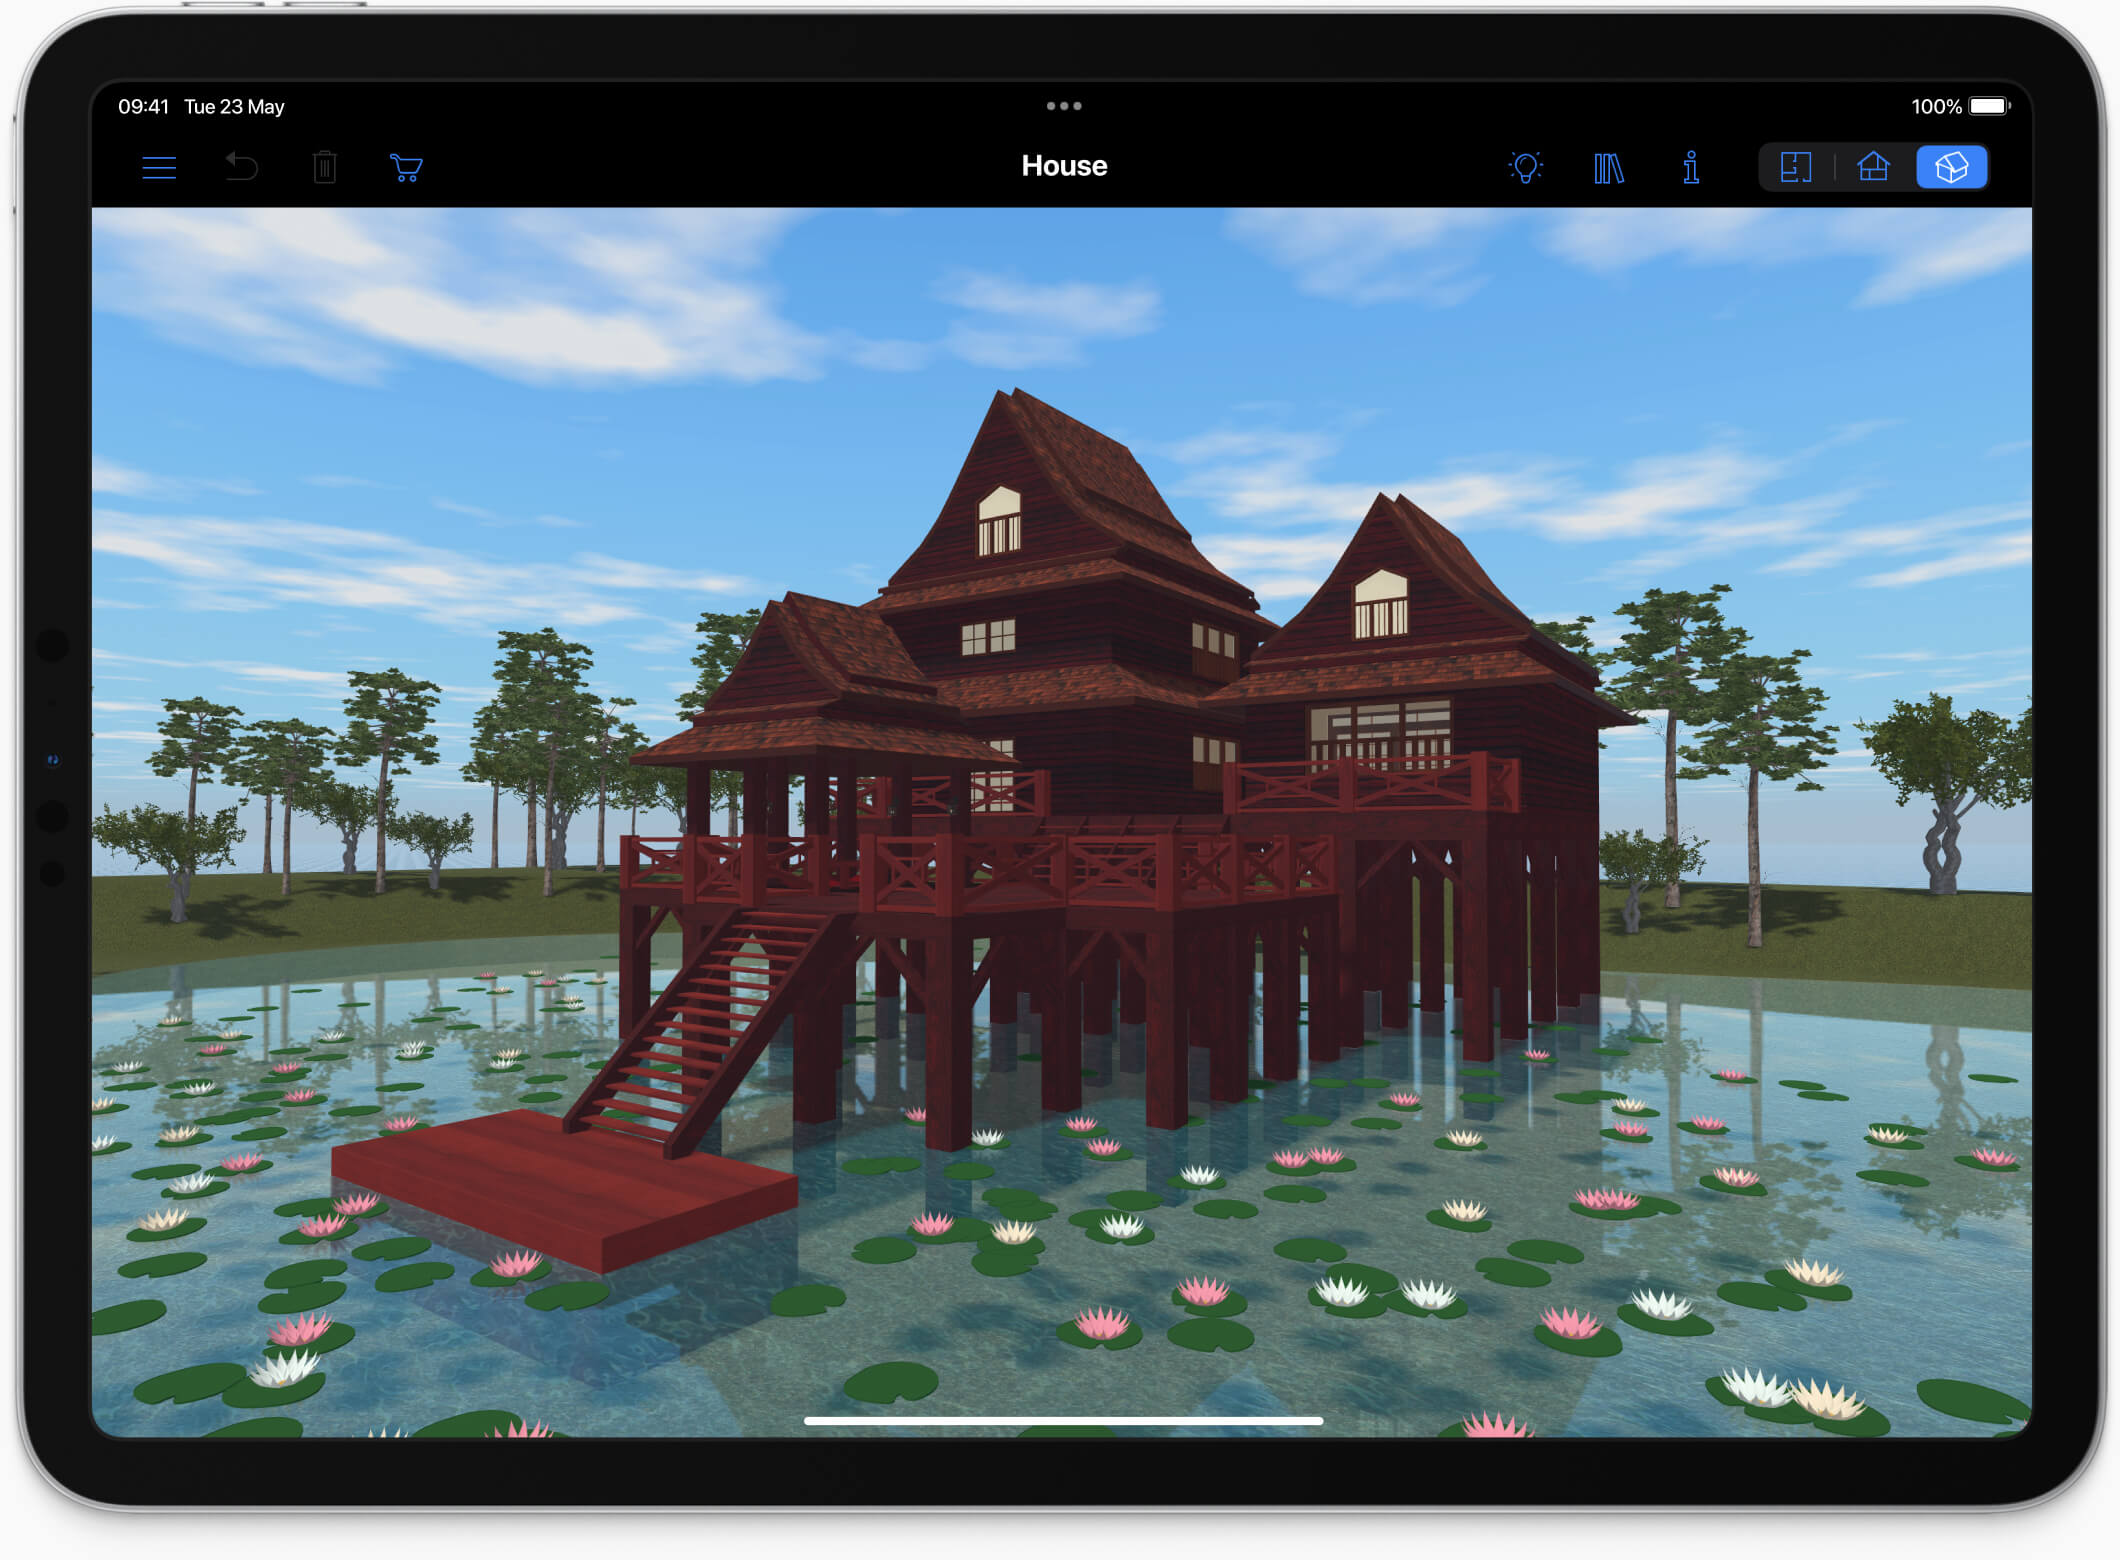 A house on a lake created in Live Home 3D Pro for iPad.